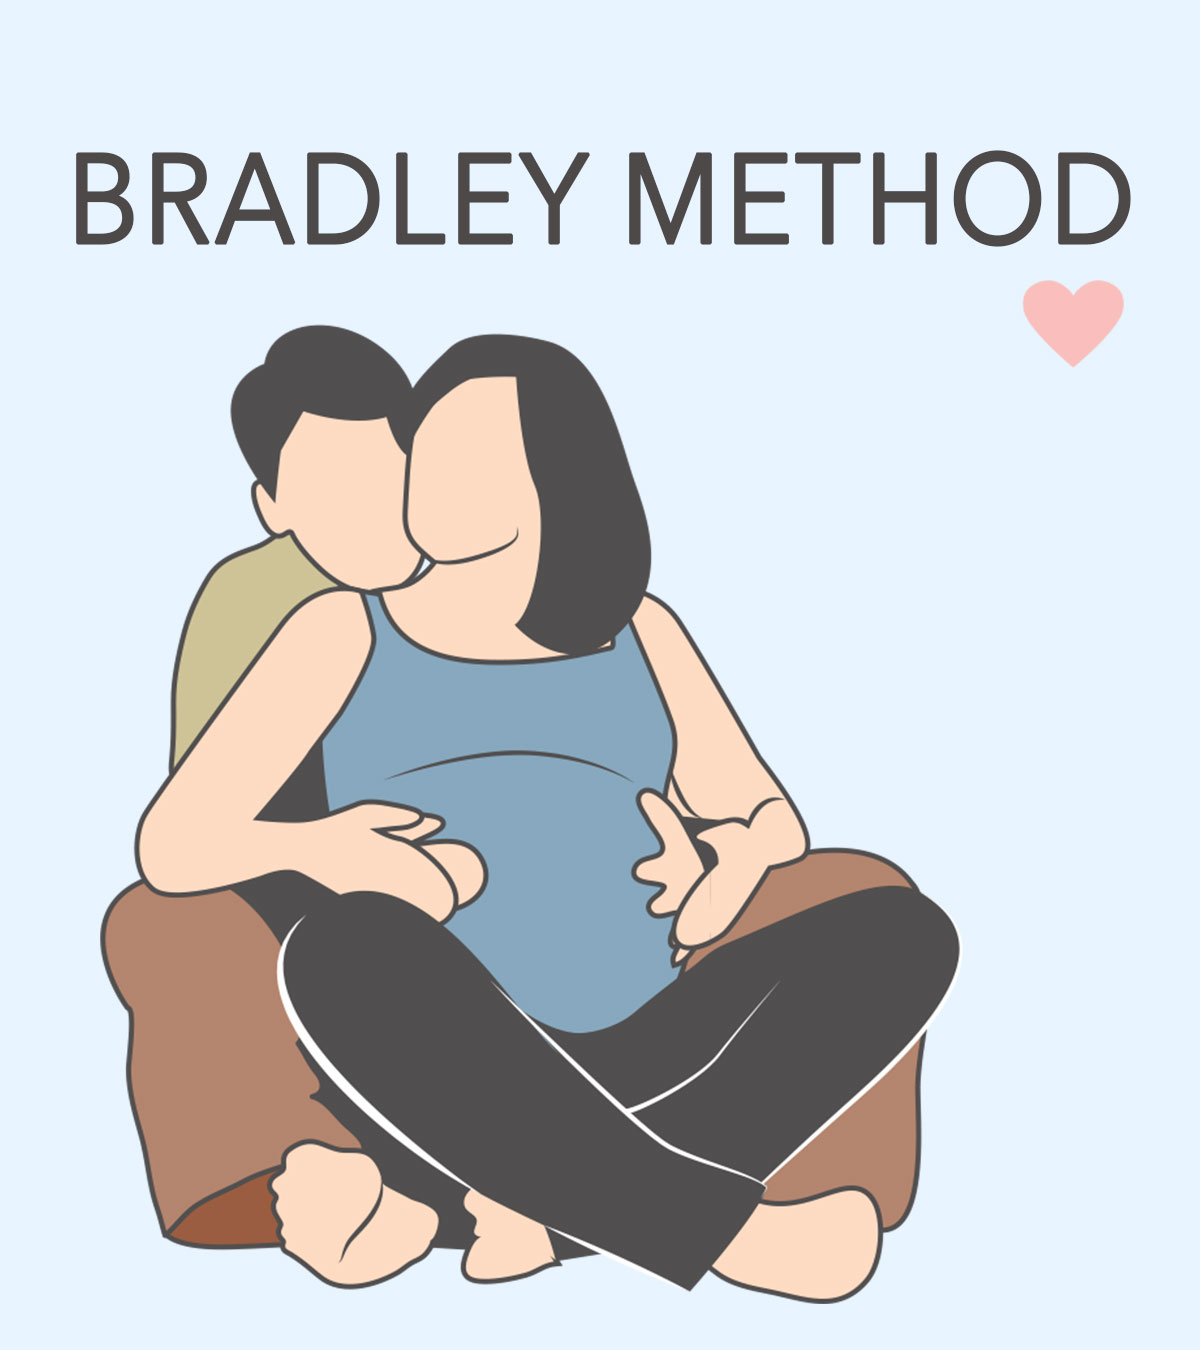 Bradley Method: What Is It And What Are Its Advantages